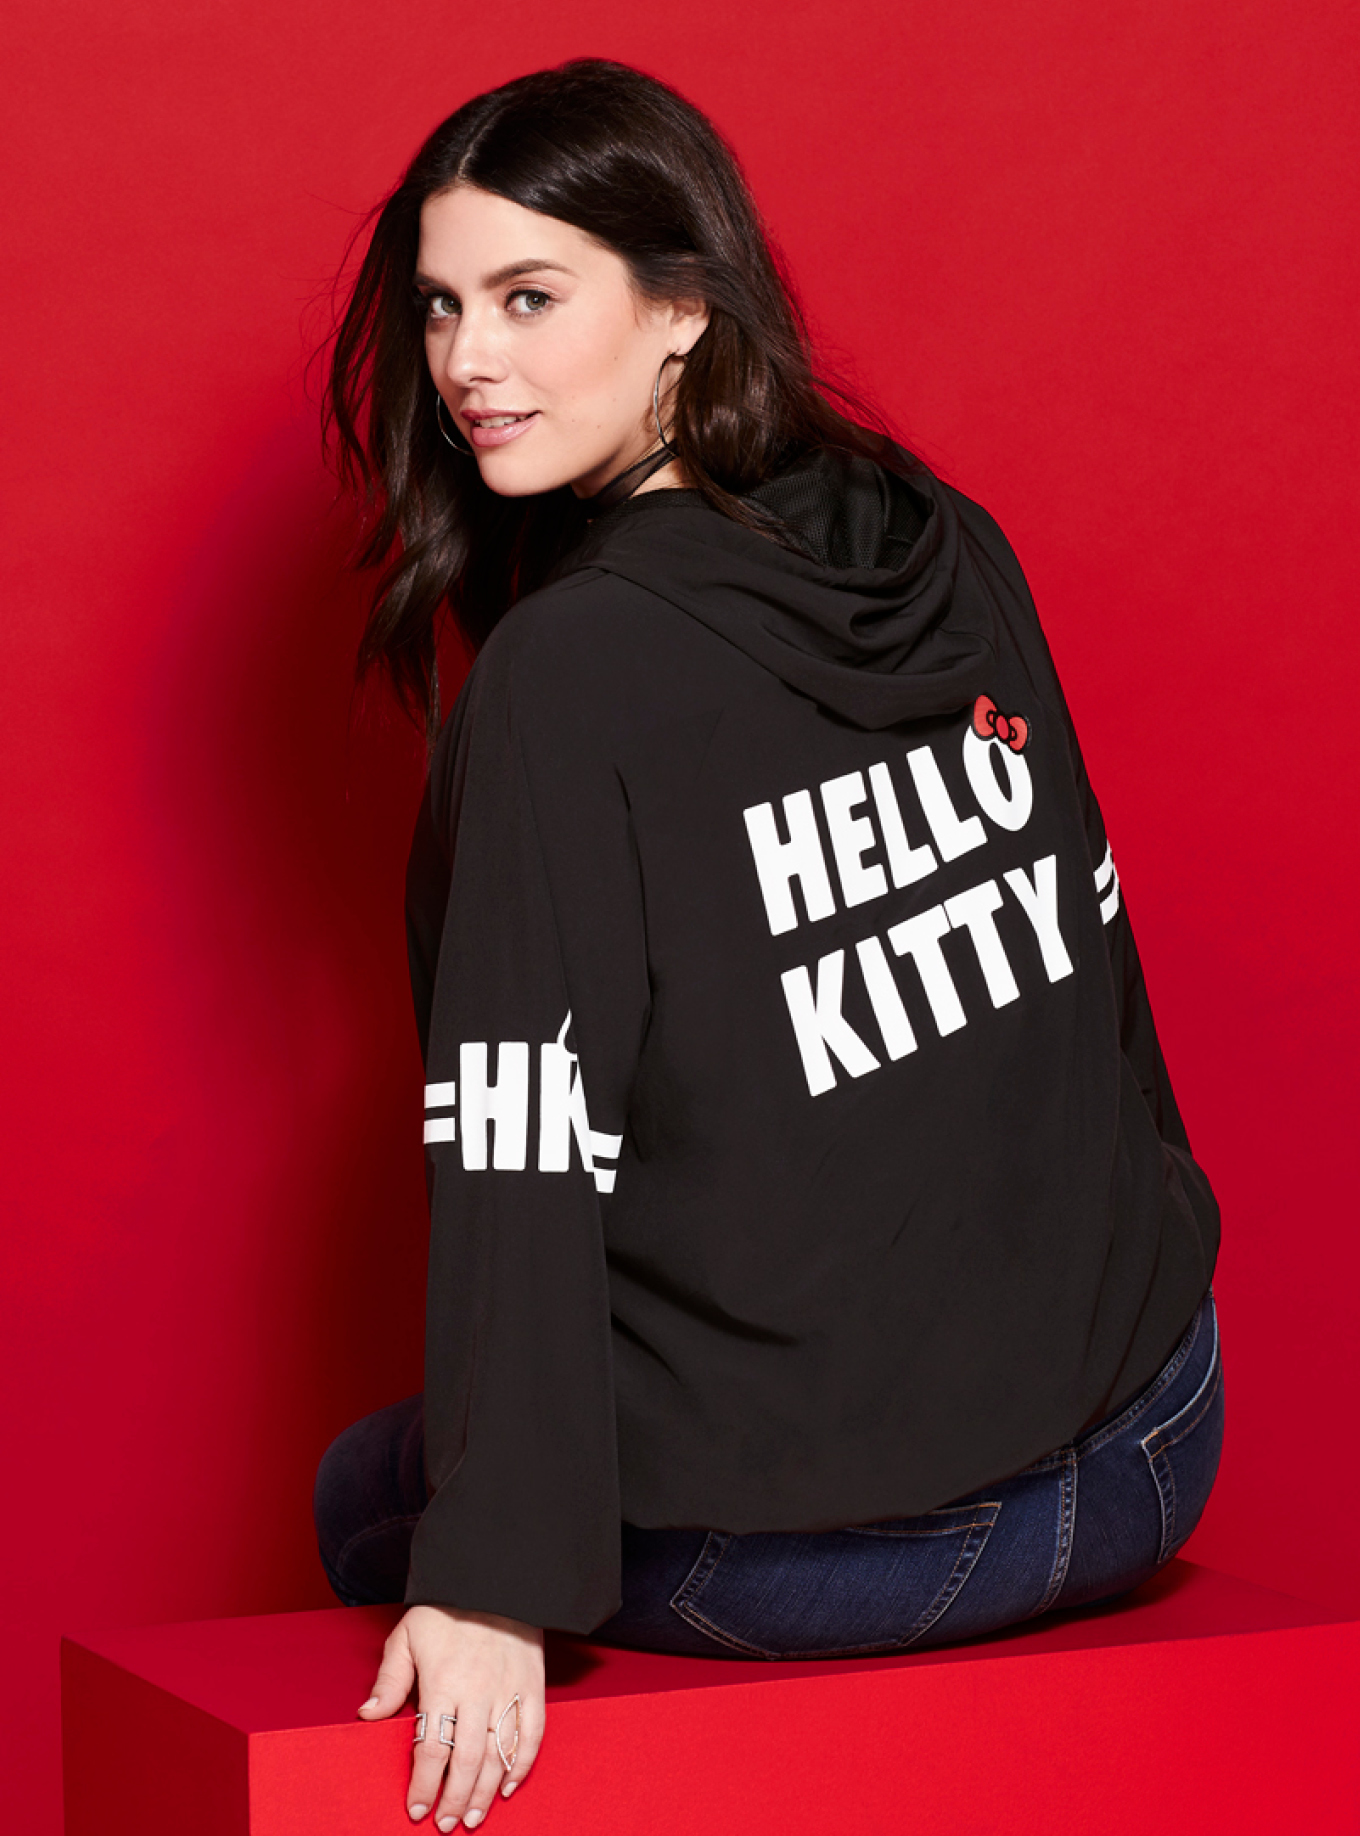 Torrid brings us anothing fresh collaboration as it features Hello Kitty! The collection has everything from accessories to lingerie. Check it ou!